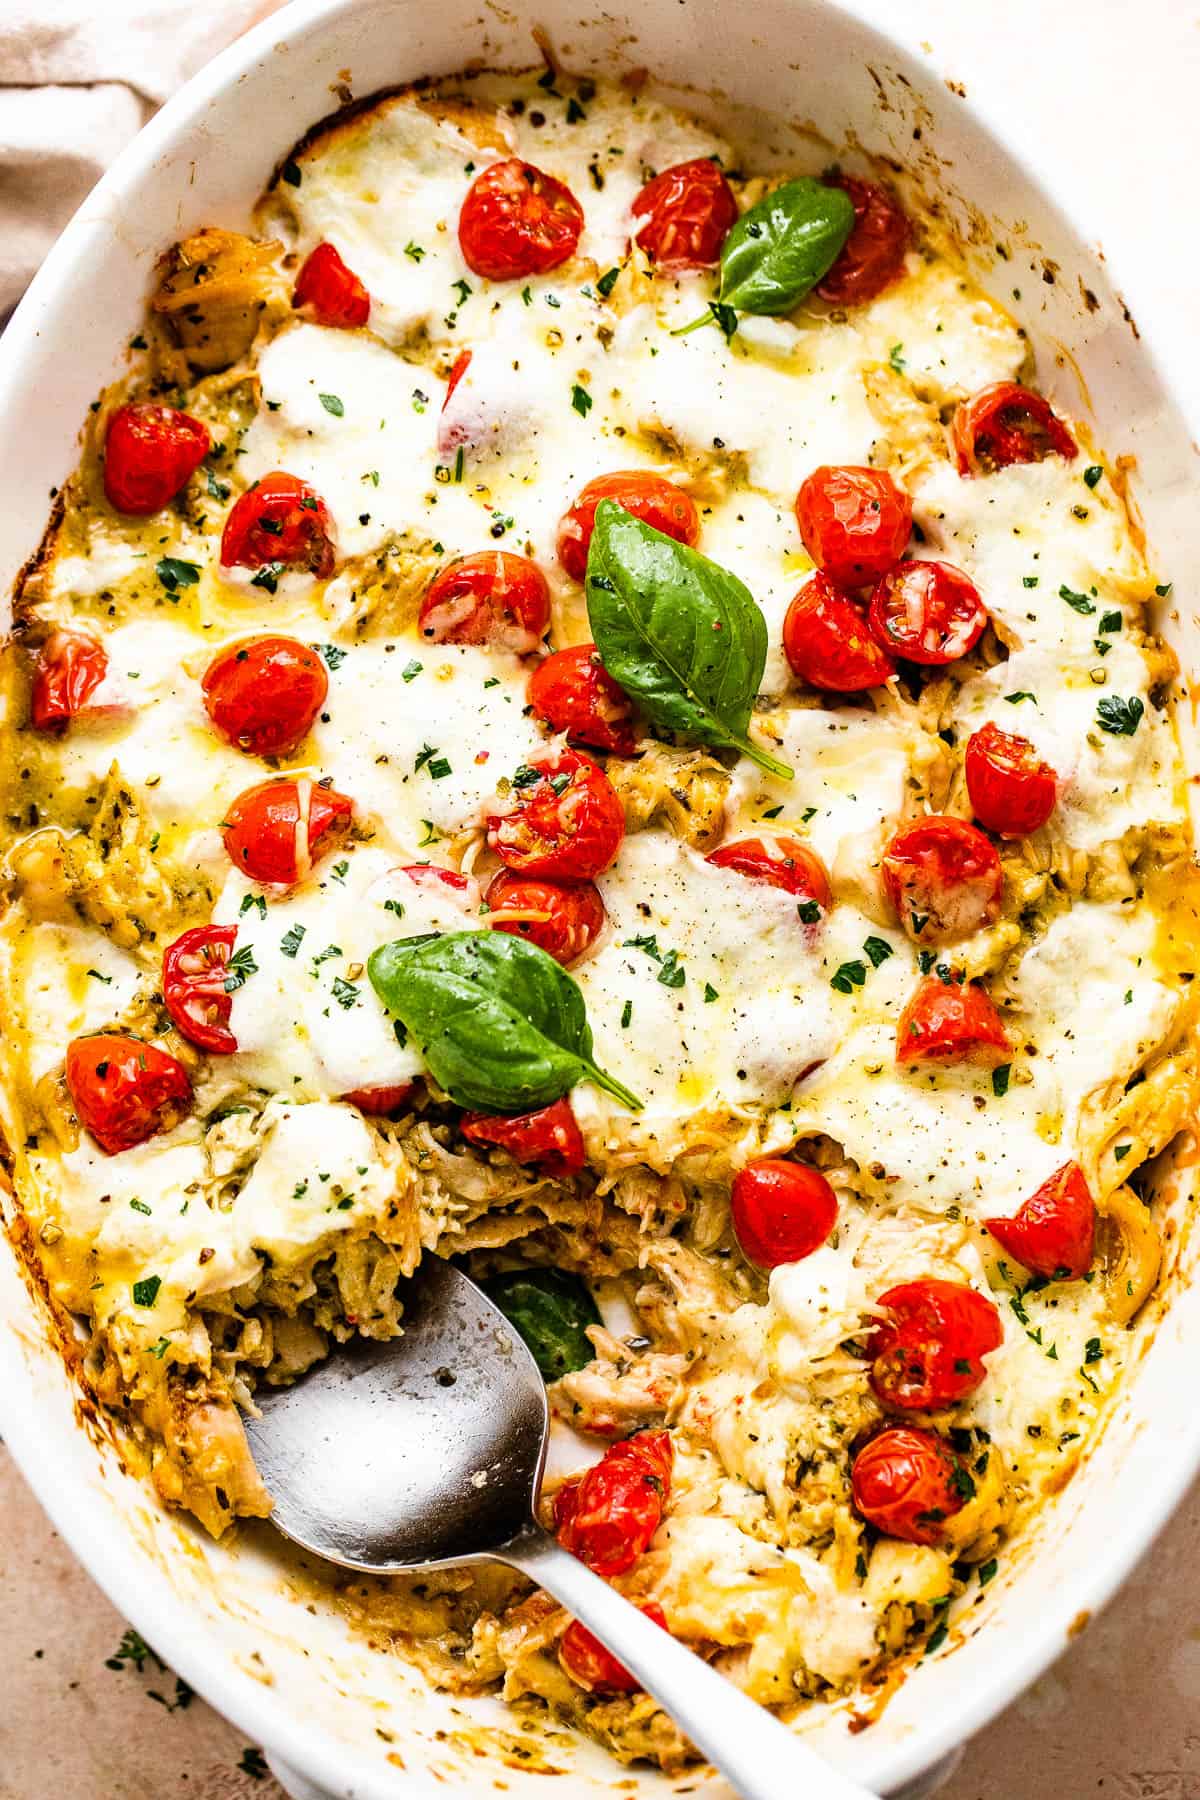 spooning out chicken caprese casserole from the baking dish